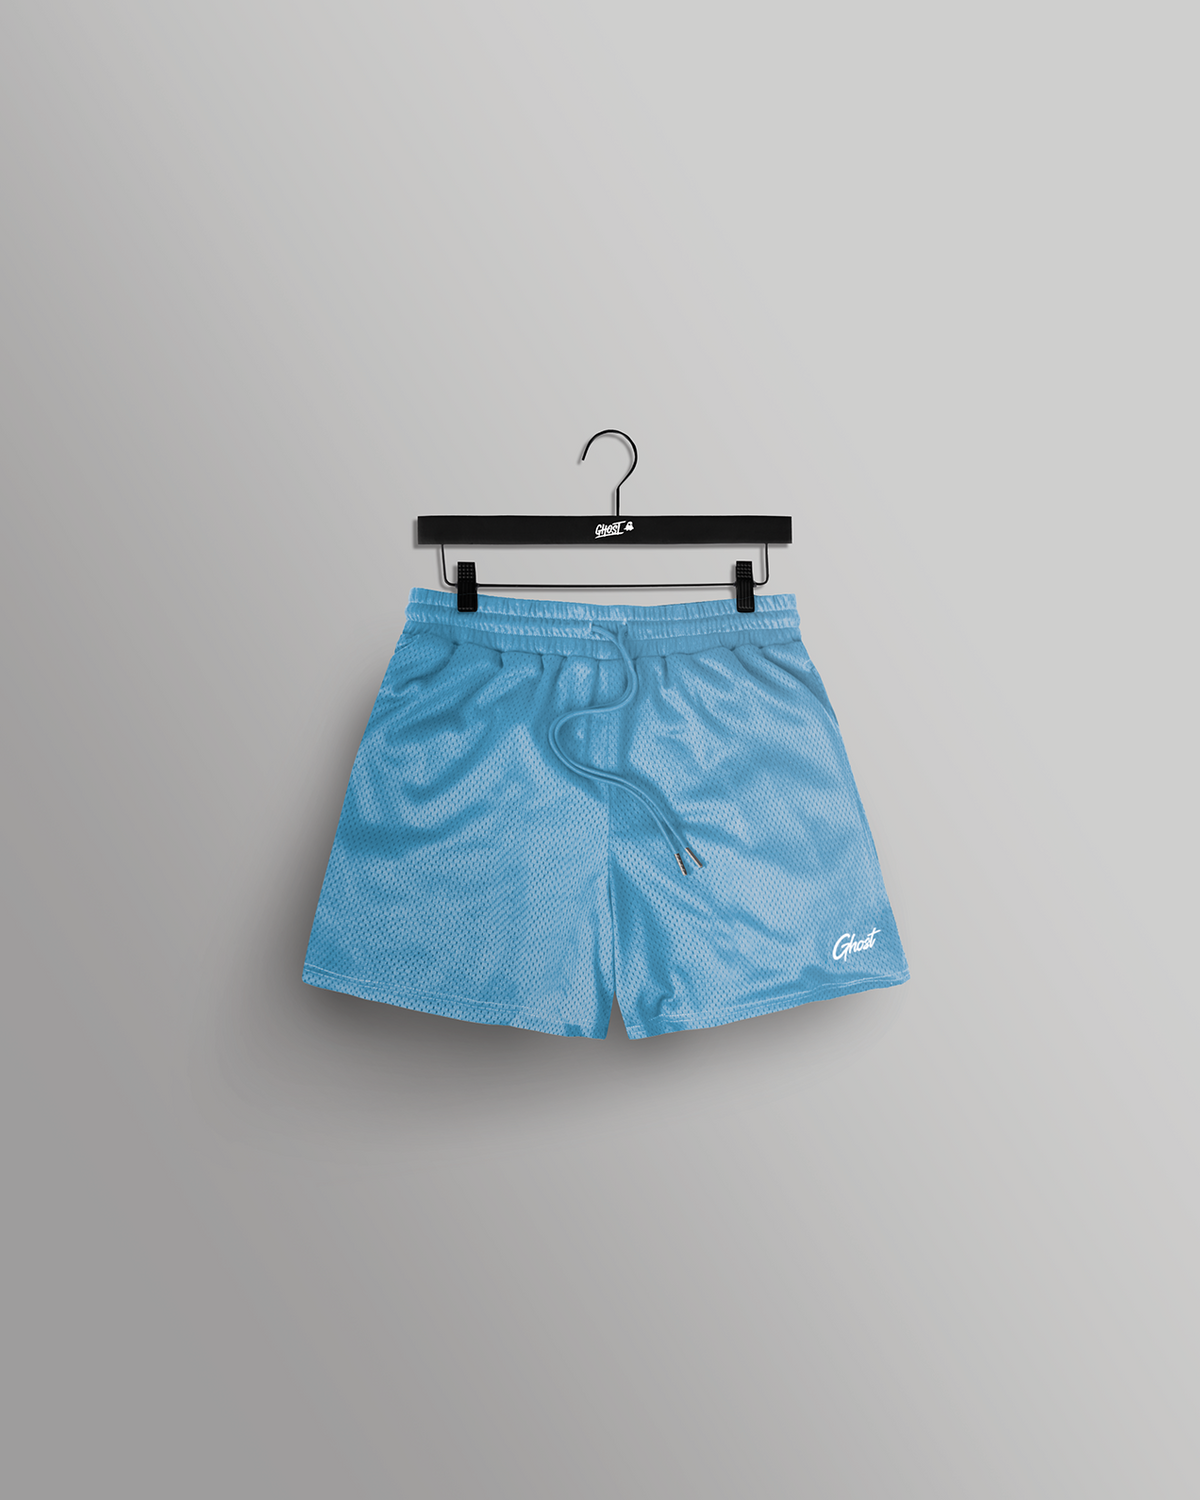 GHOST® SUMMER INSPO MESH SHORTS | PERIWINKLE